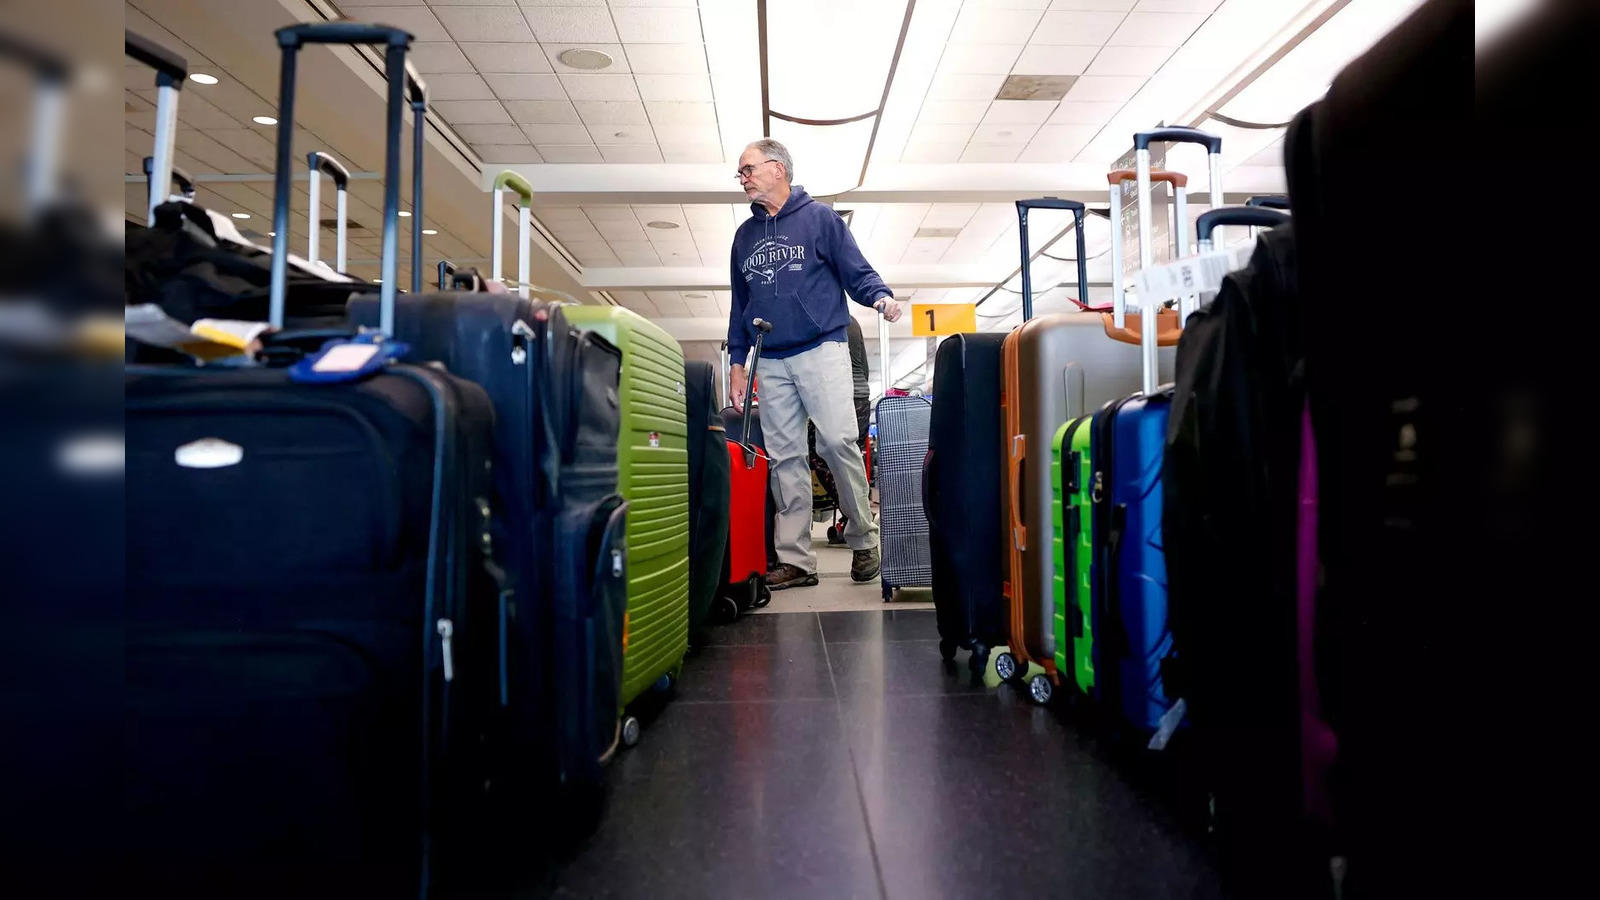 luggage industry sale: Luggage industry registers best-ever sales amid  surge in travel, big Indian weddings - The Economic Times